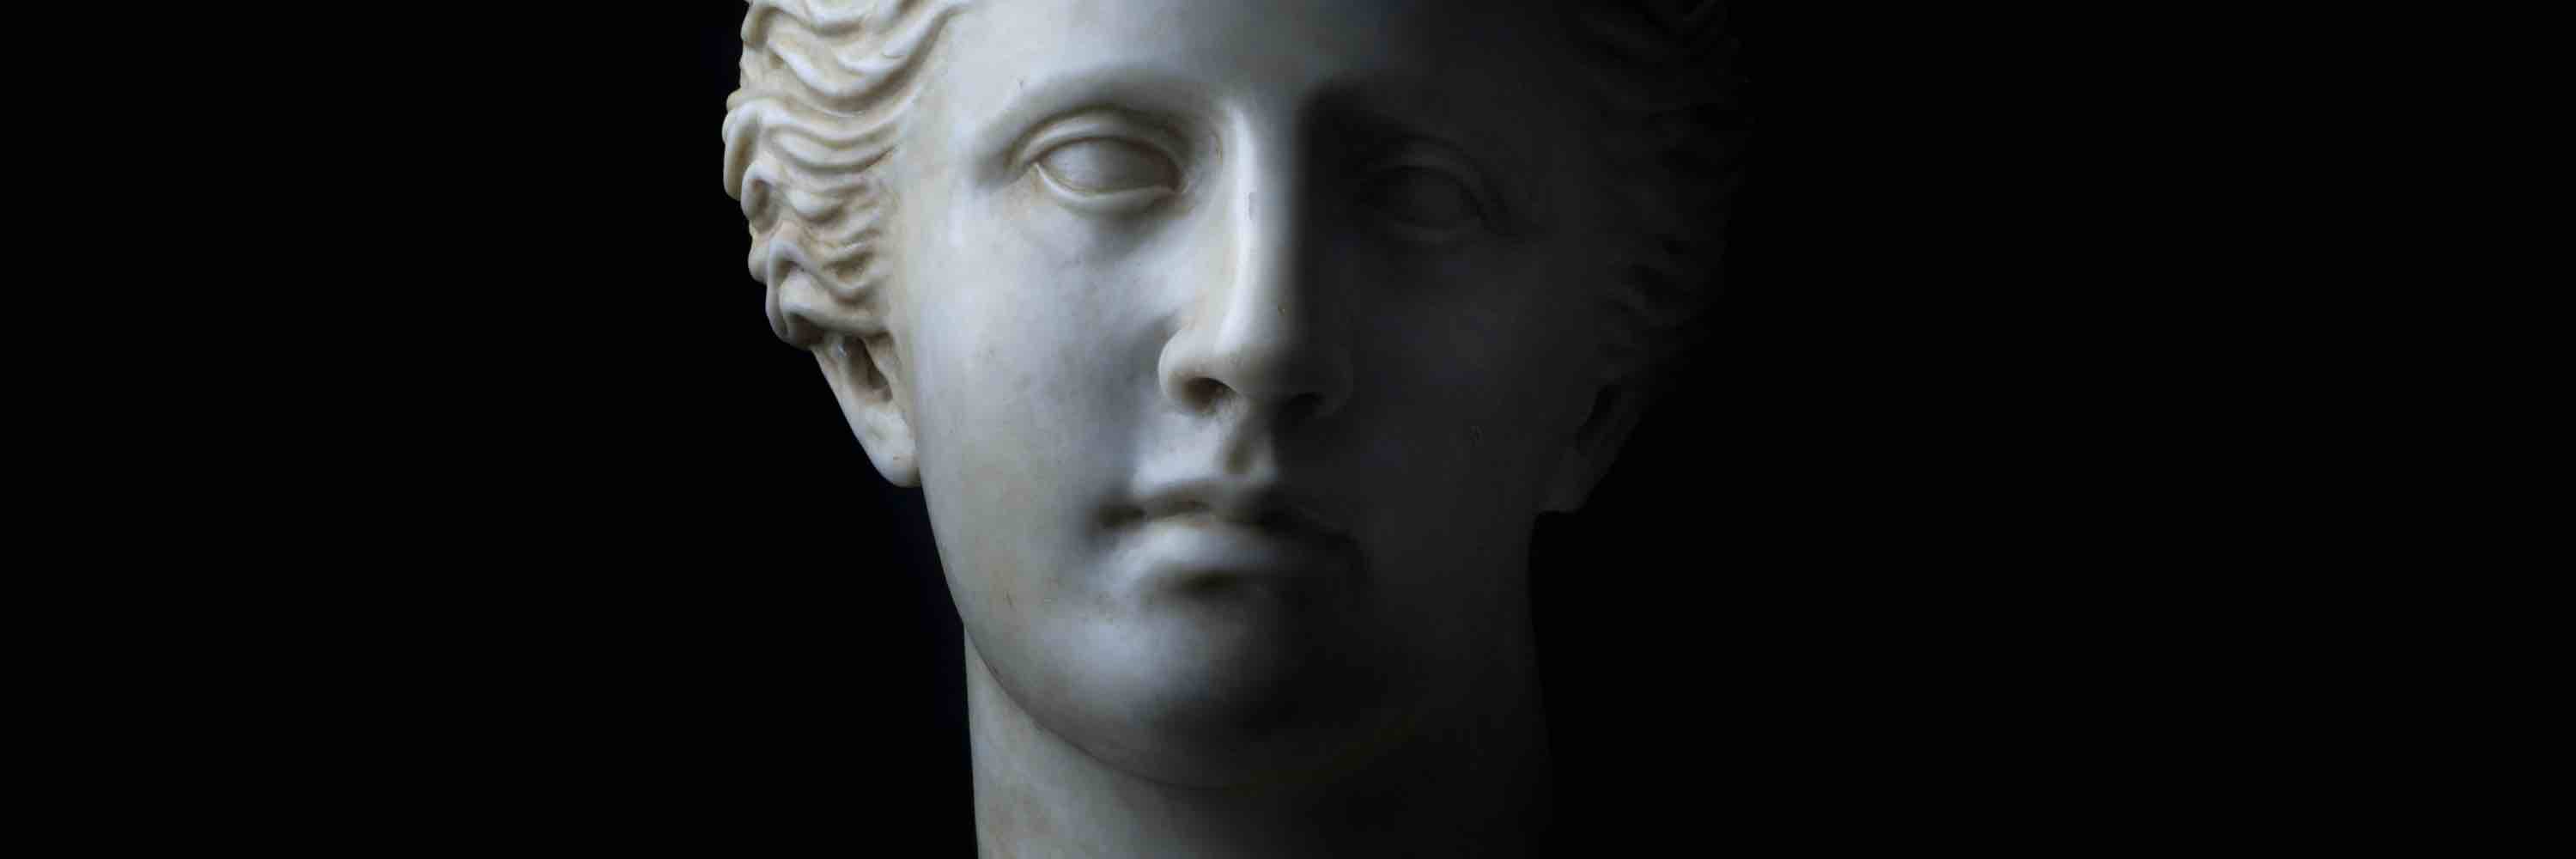 Head of Juno from Private Collection, Neoclassical Art, 19th Century